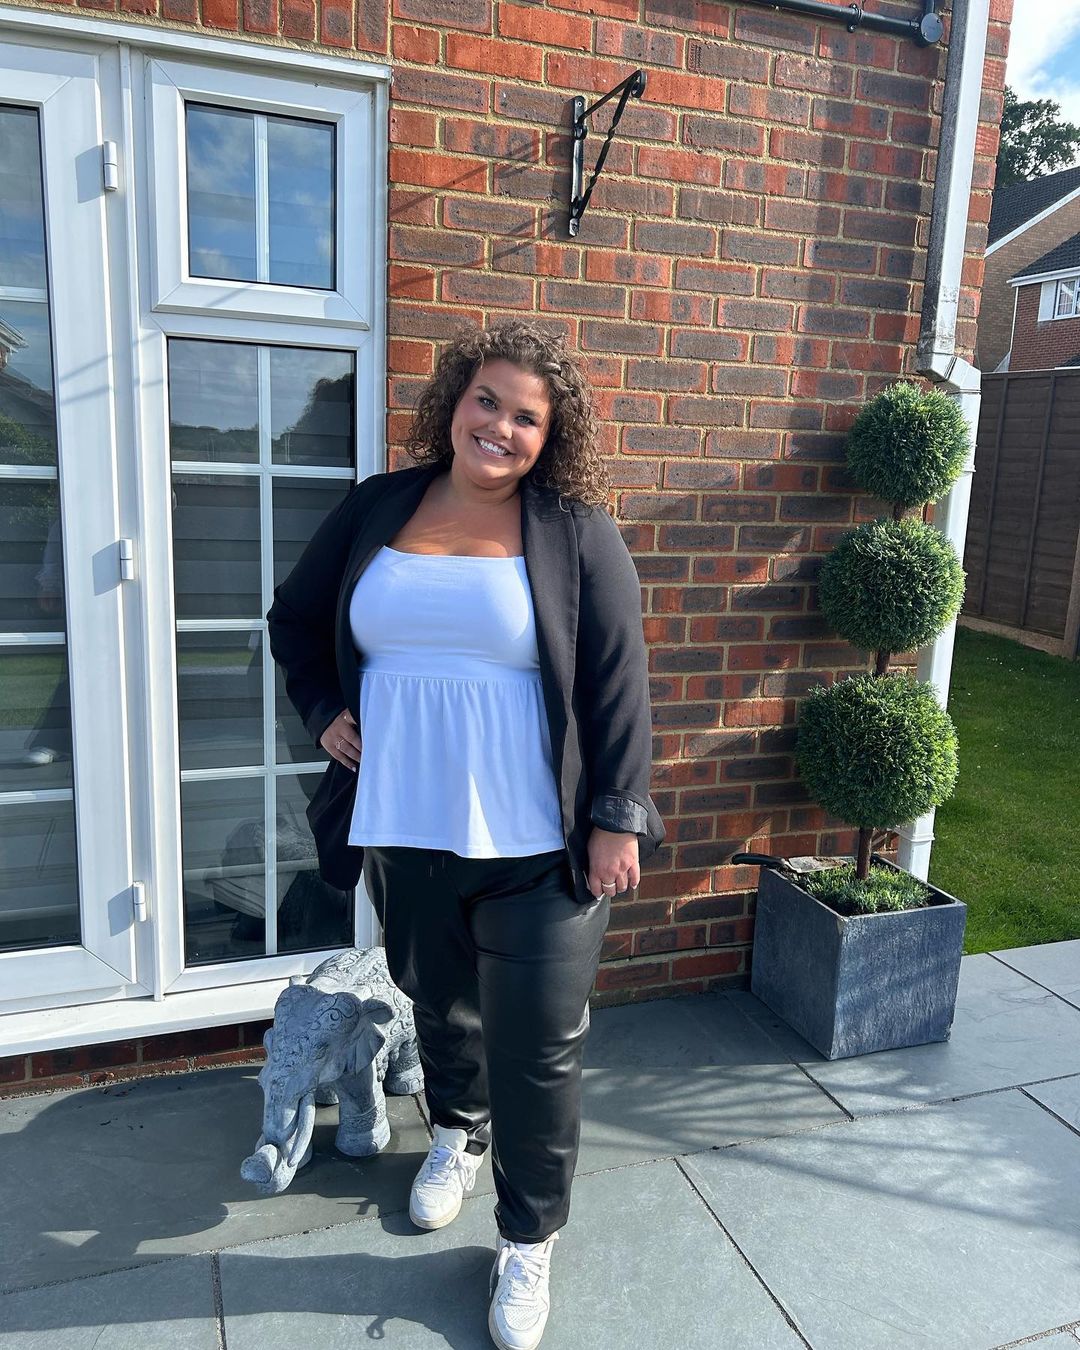 Gogglebox’s Amy Tapper shows off three stone weight loss in leather trousers and strapless top